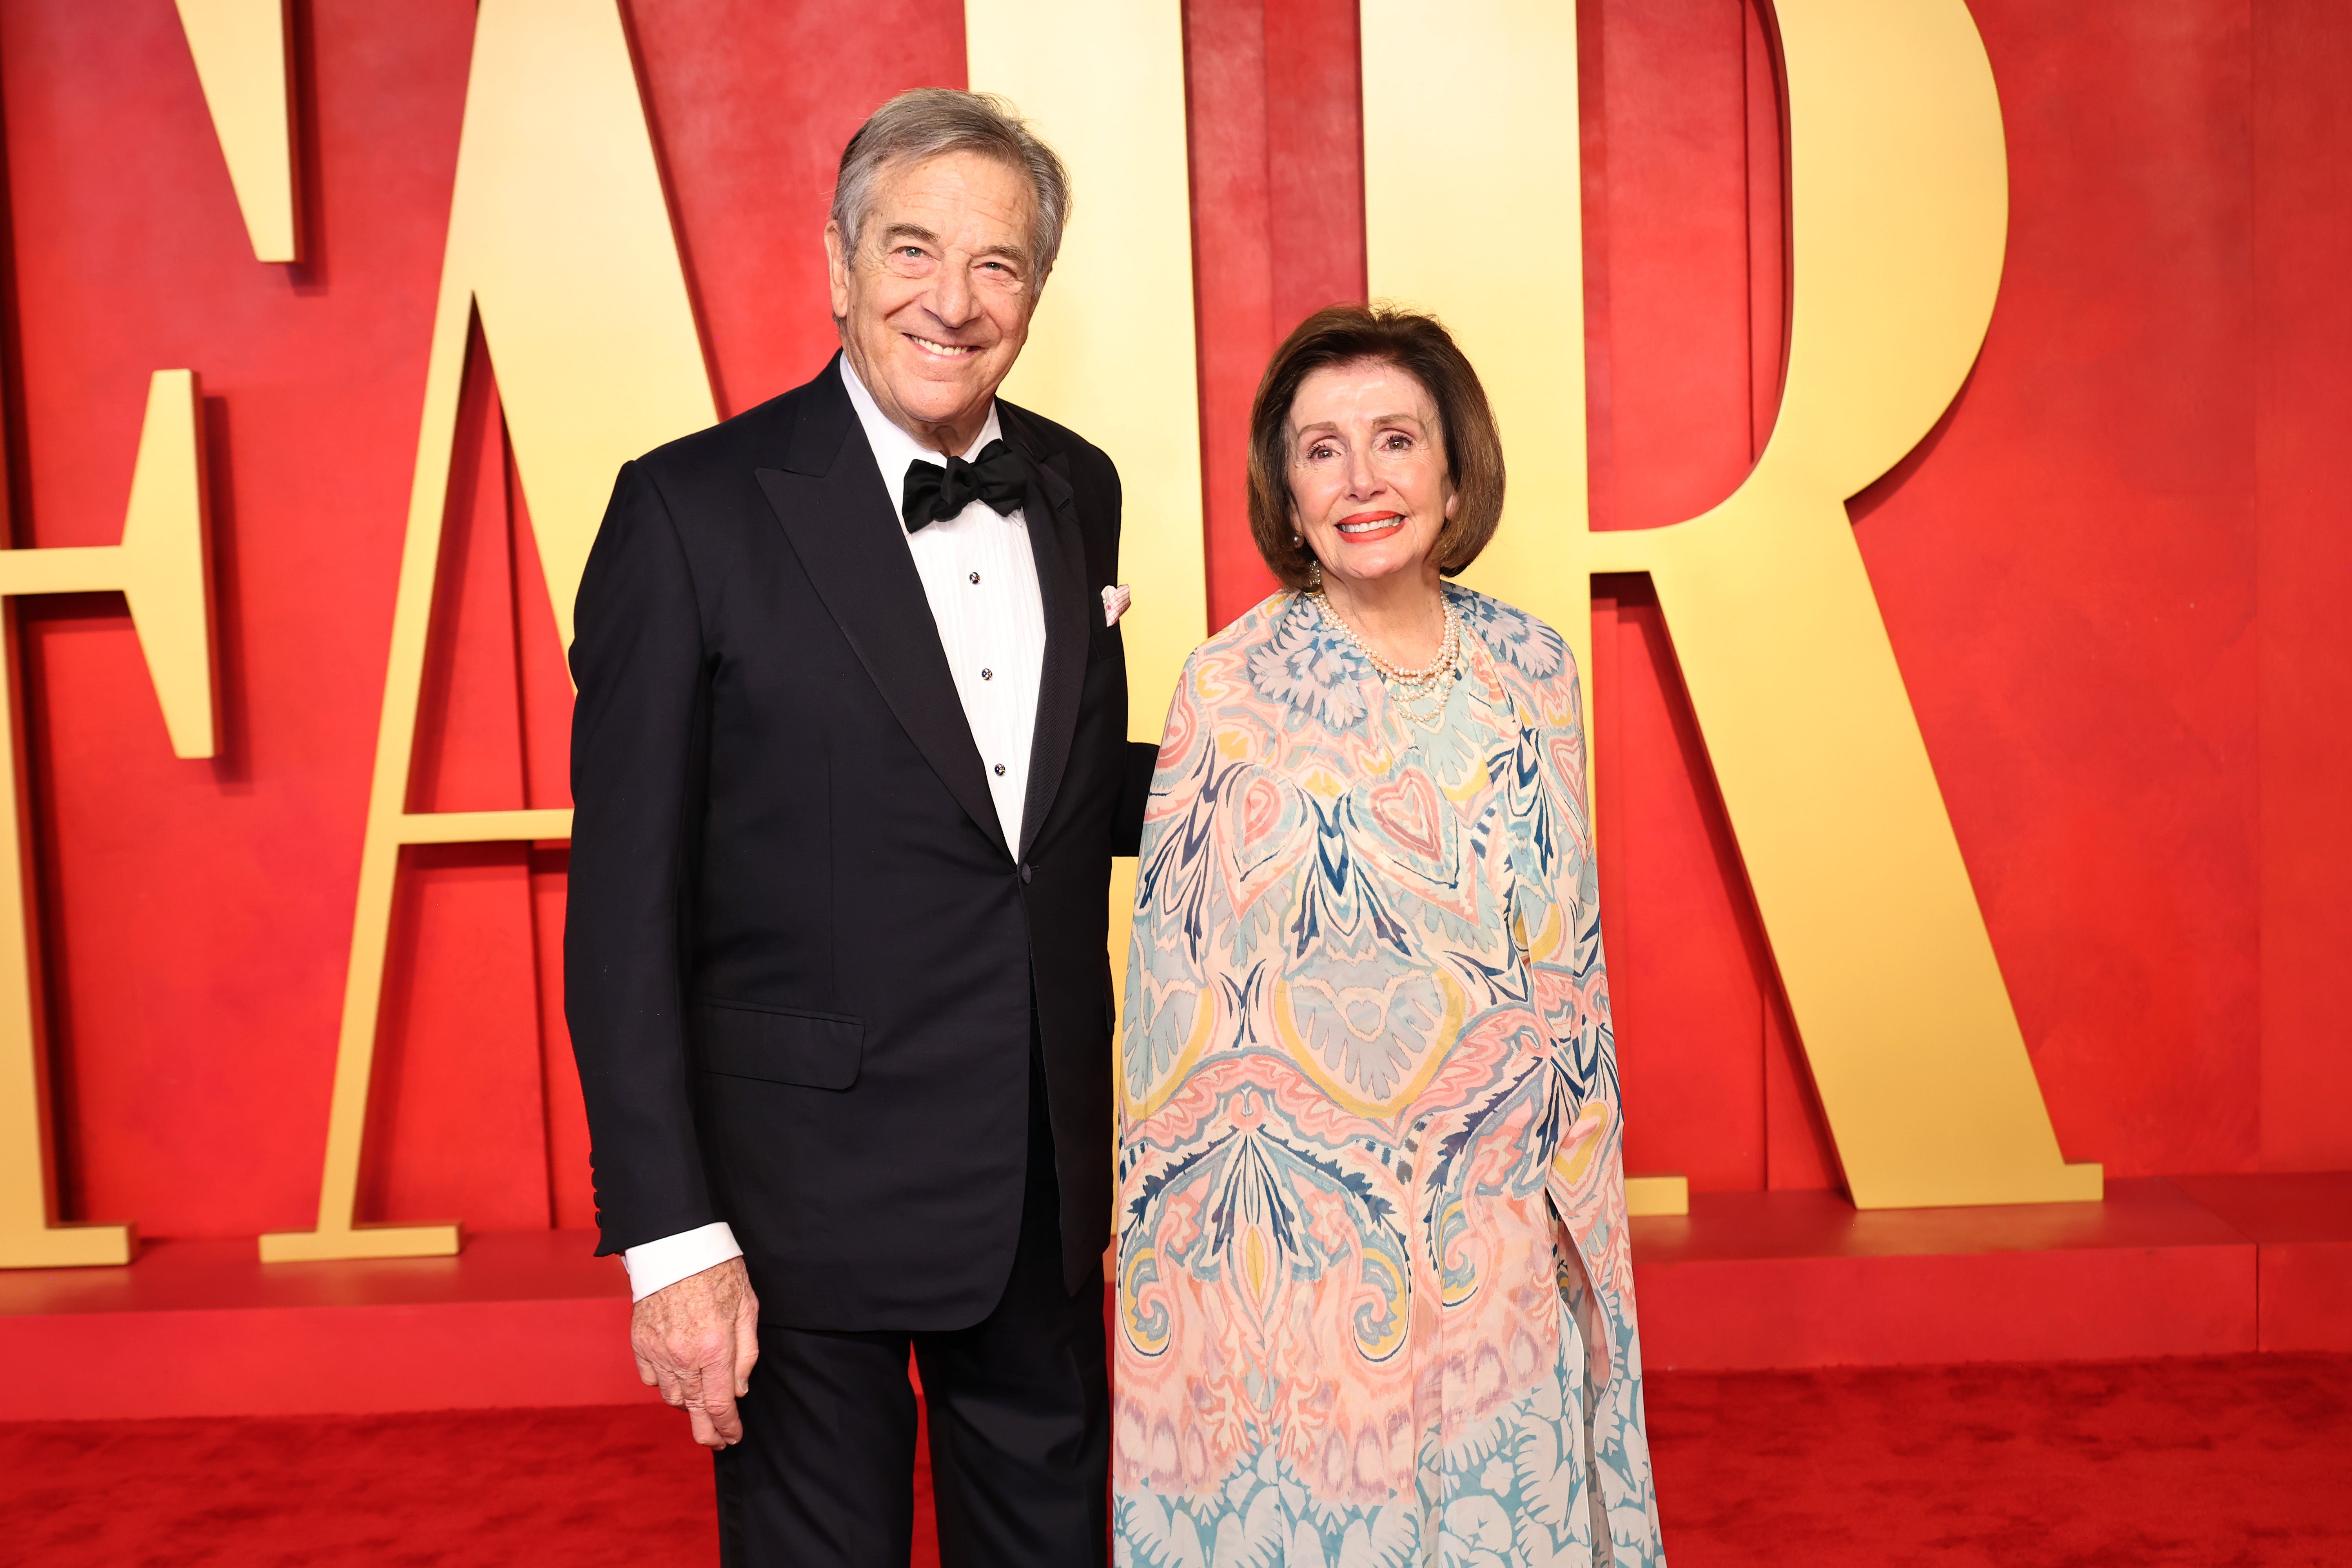 Paul and Nancy Pelosi attend the Vanity Fair Oscar party in Beverly Hills in March